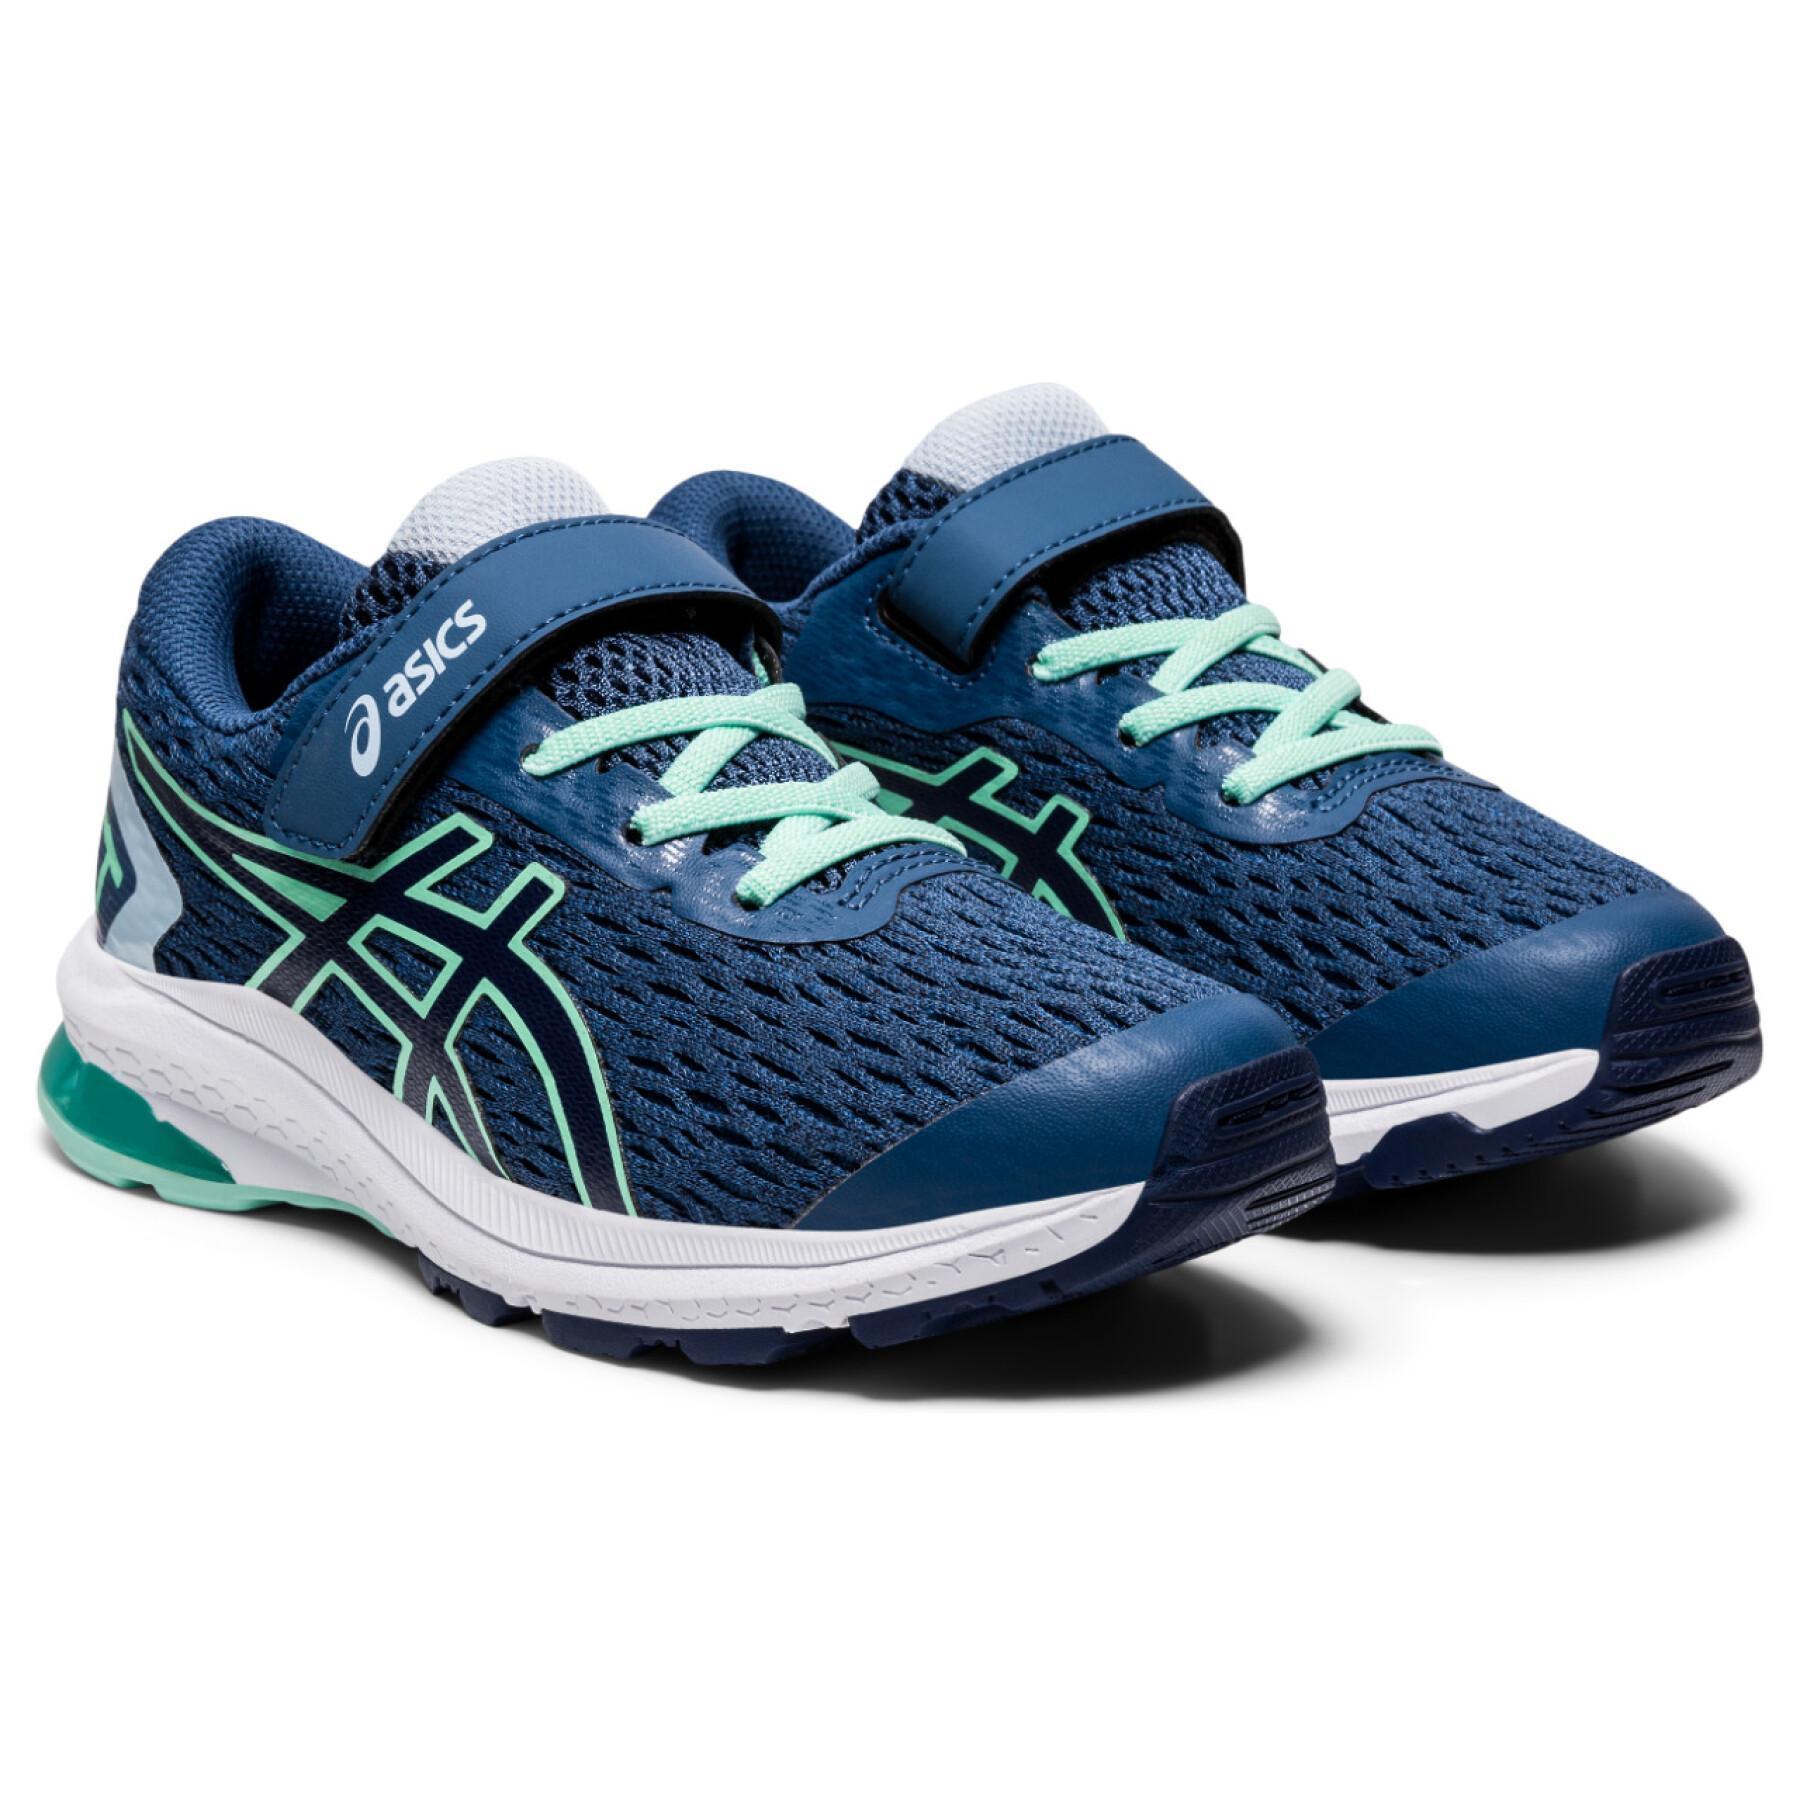 Kid shoes Asics Gt-1000 9 PS